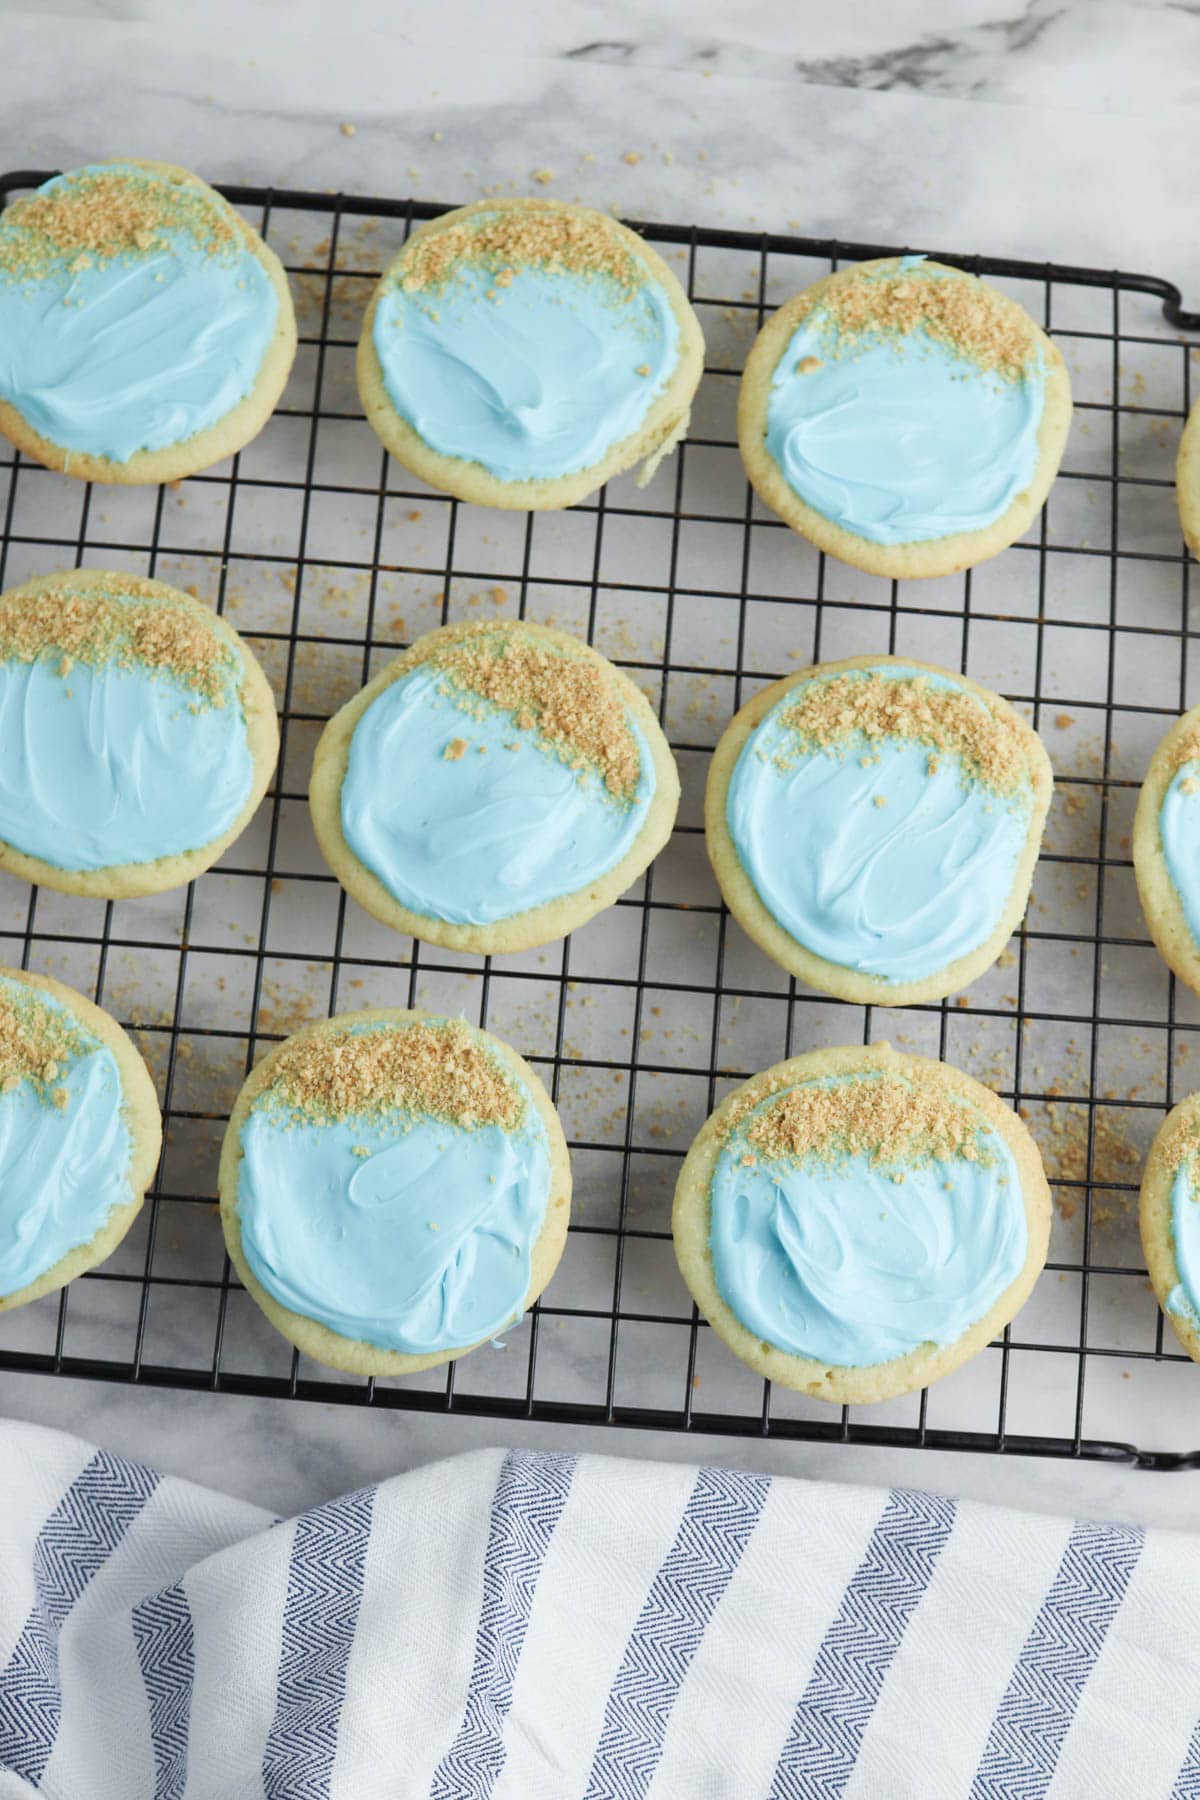 Sugar cookies with blue frosting and crushed graham crackers